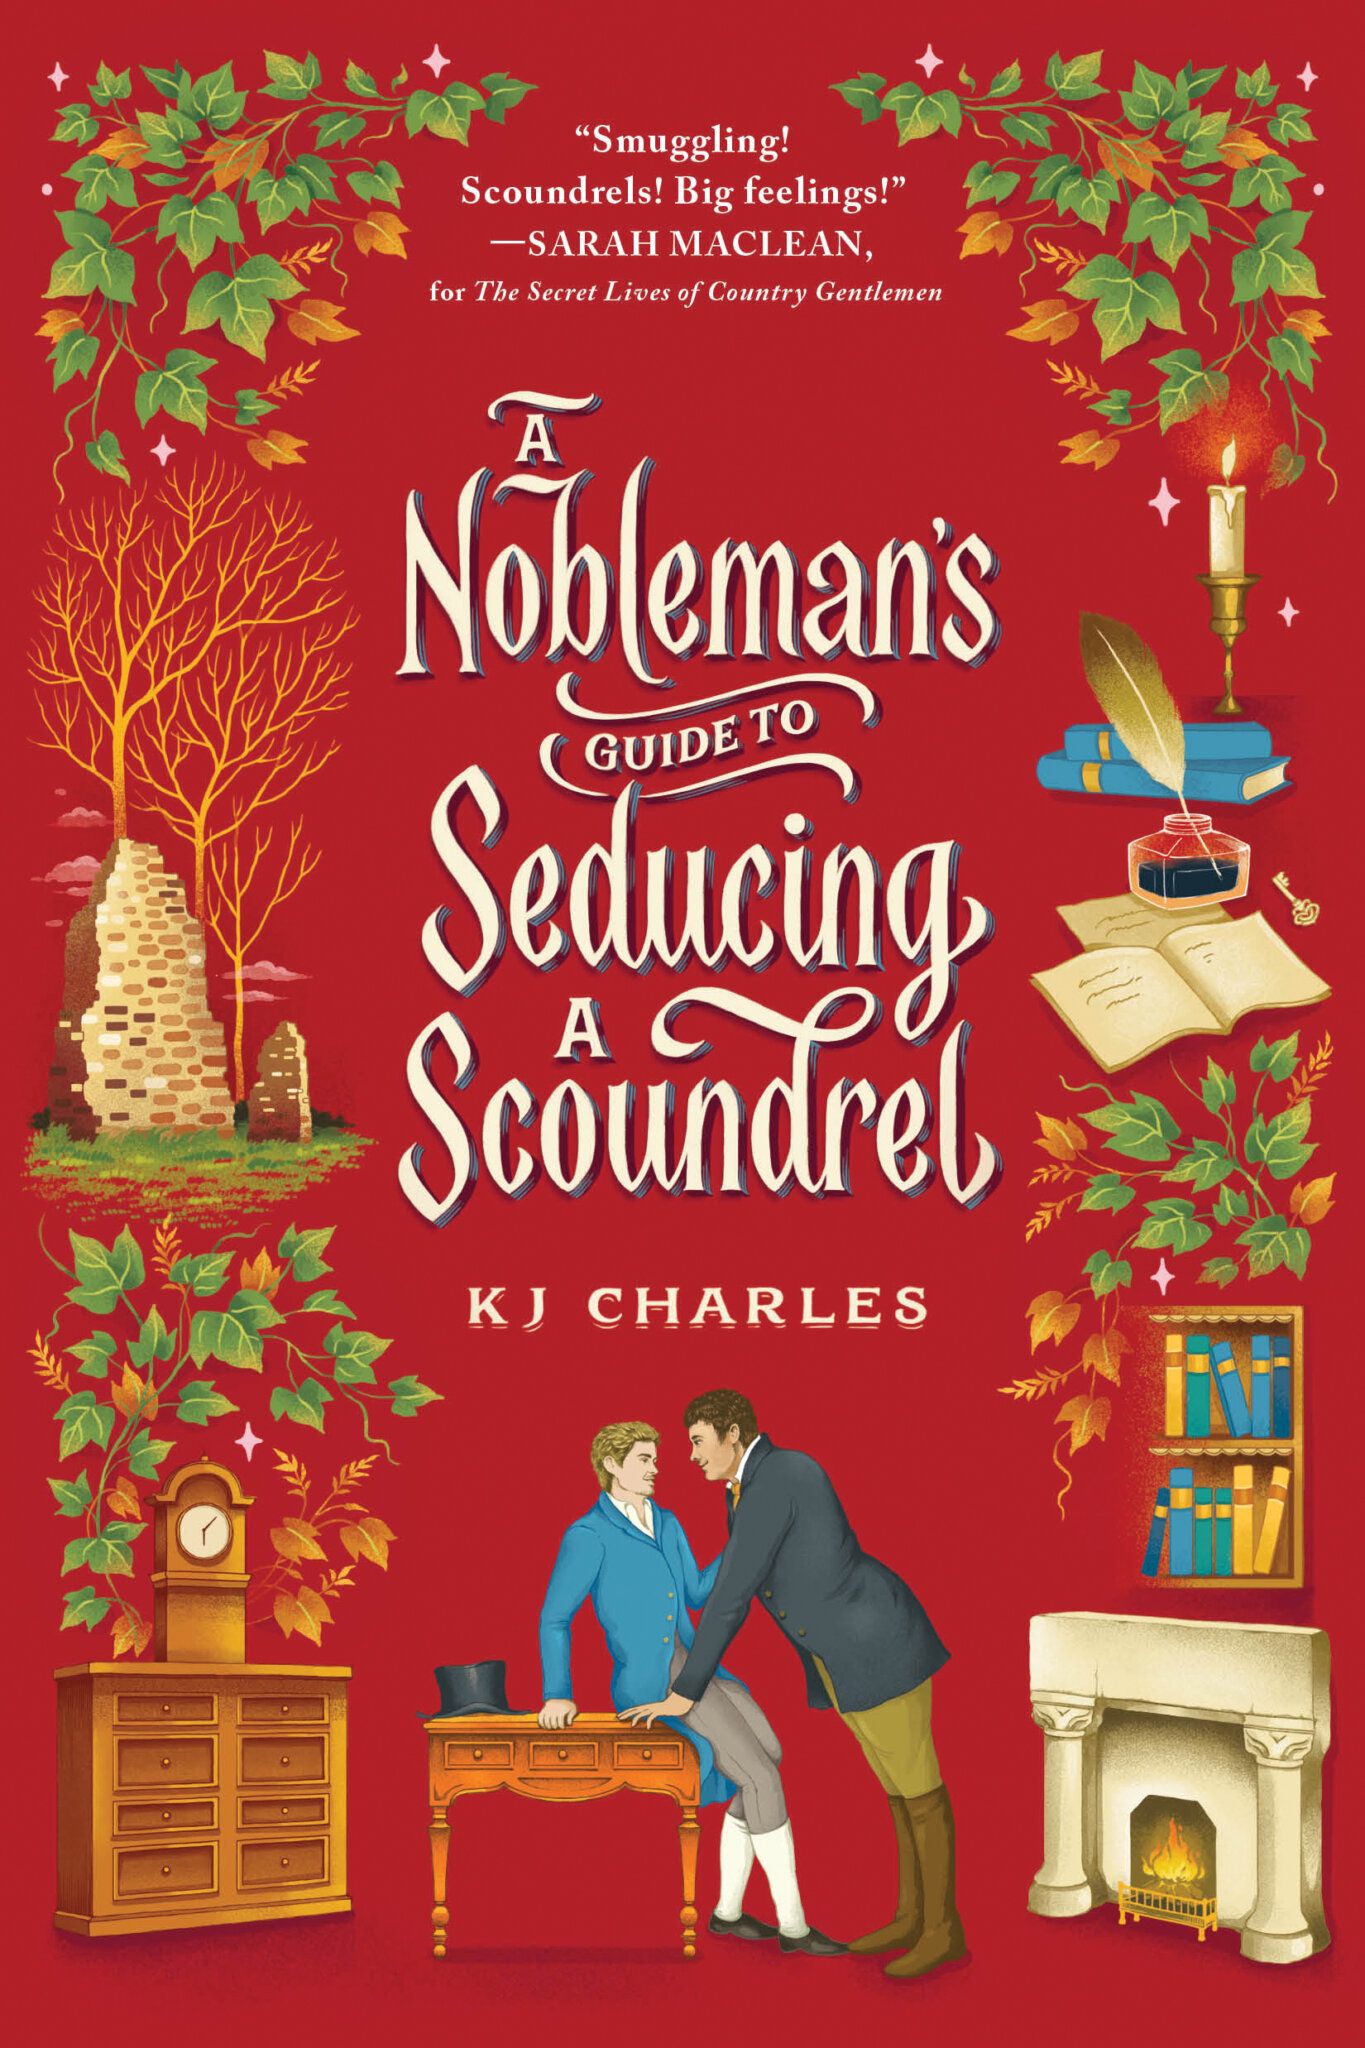 nobleman's guide to seducing a scoundrel book cover